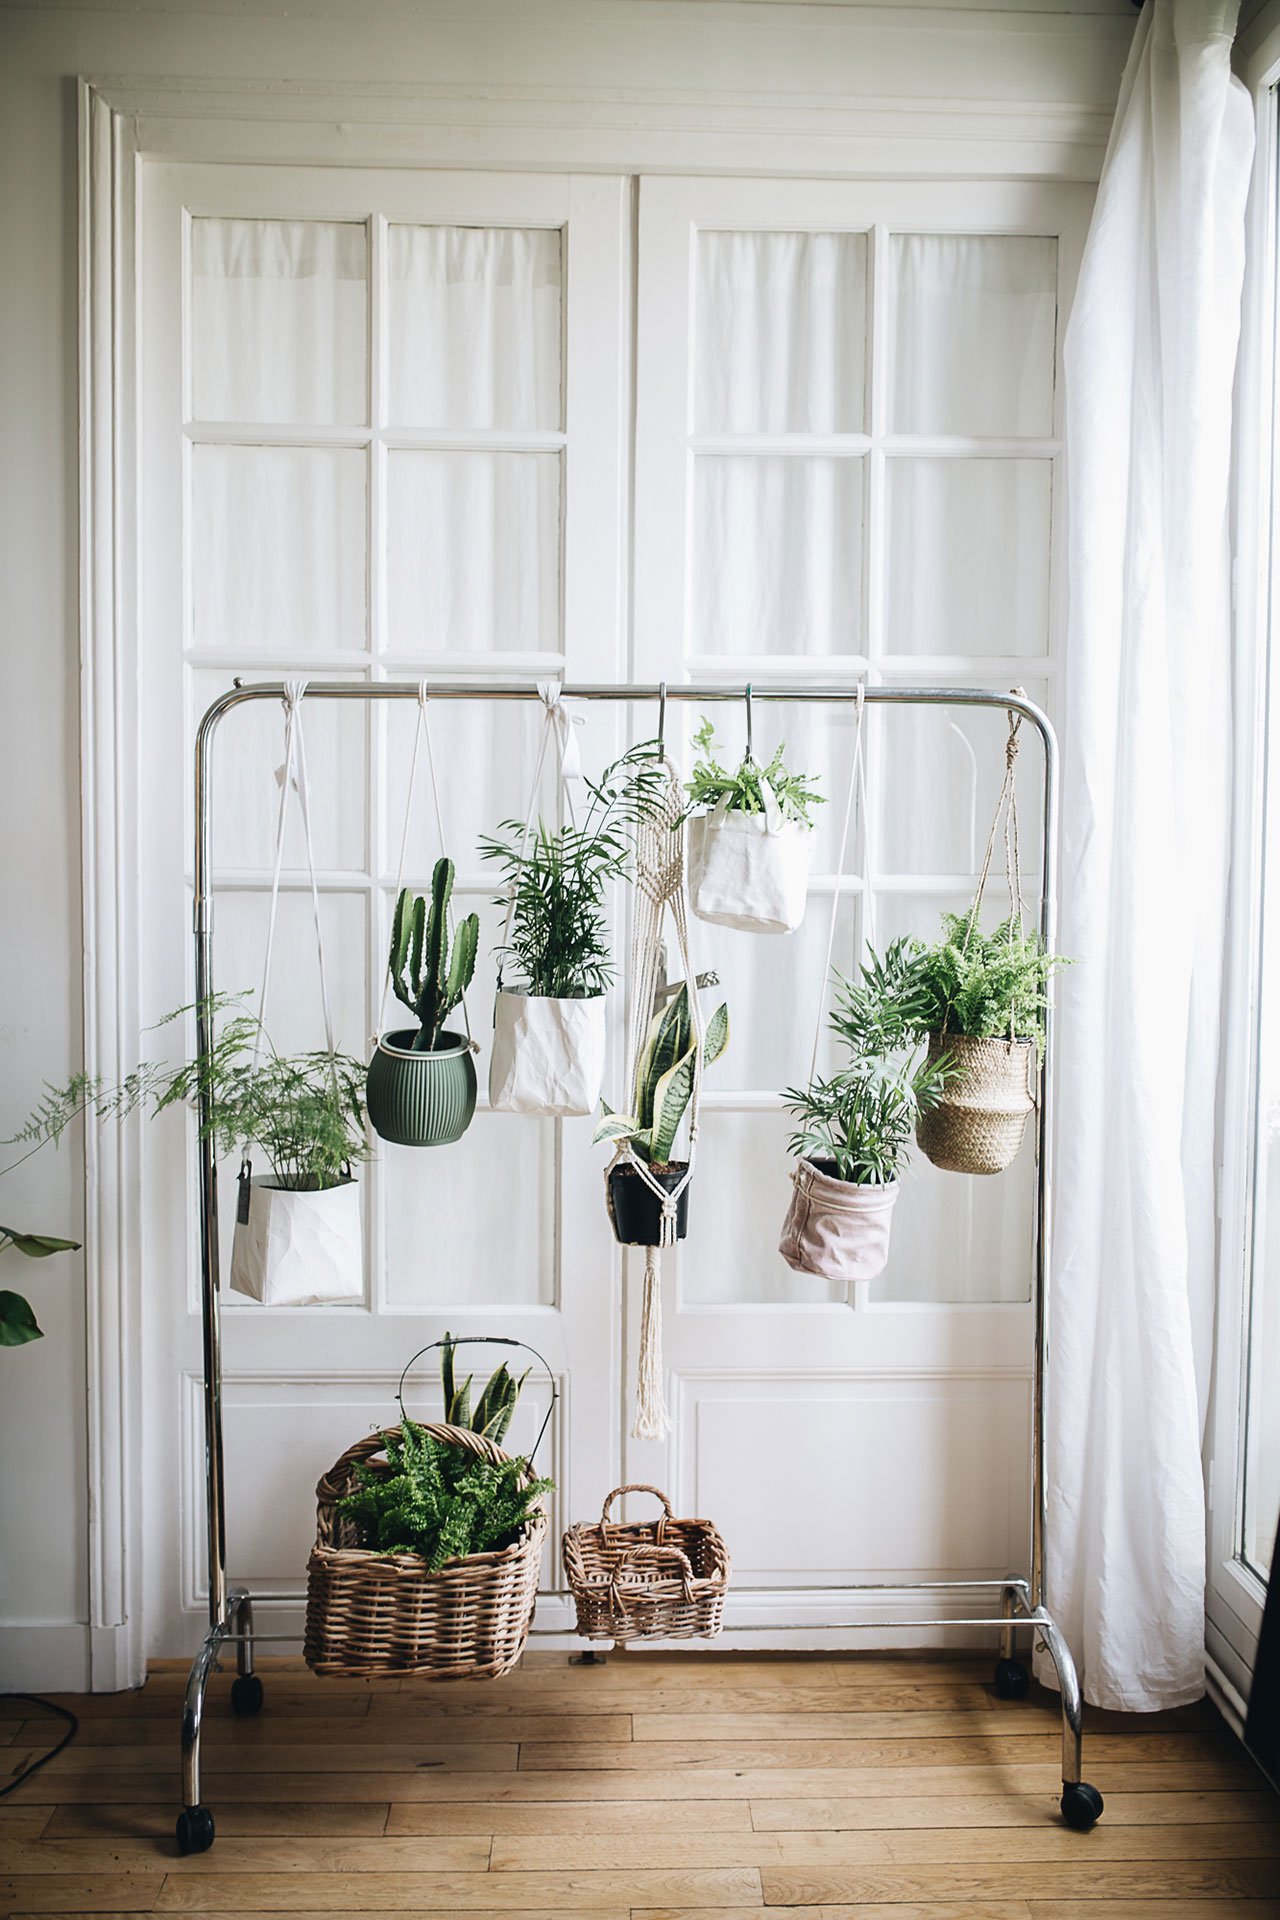 PLANT TRIBE LIVING HAPPILY EVER AFTER WITH PLANTSBy Igor Josifovic &amp; Judith de Graaff
Photo: The home of Rebecca Breach In Paris.Photography by Jules Villbrandt for Urban Jungle Bloggers.